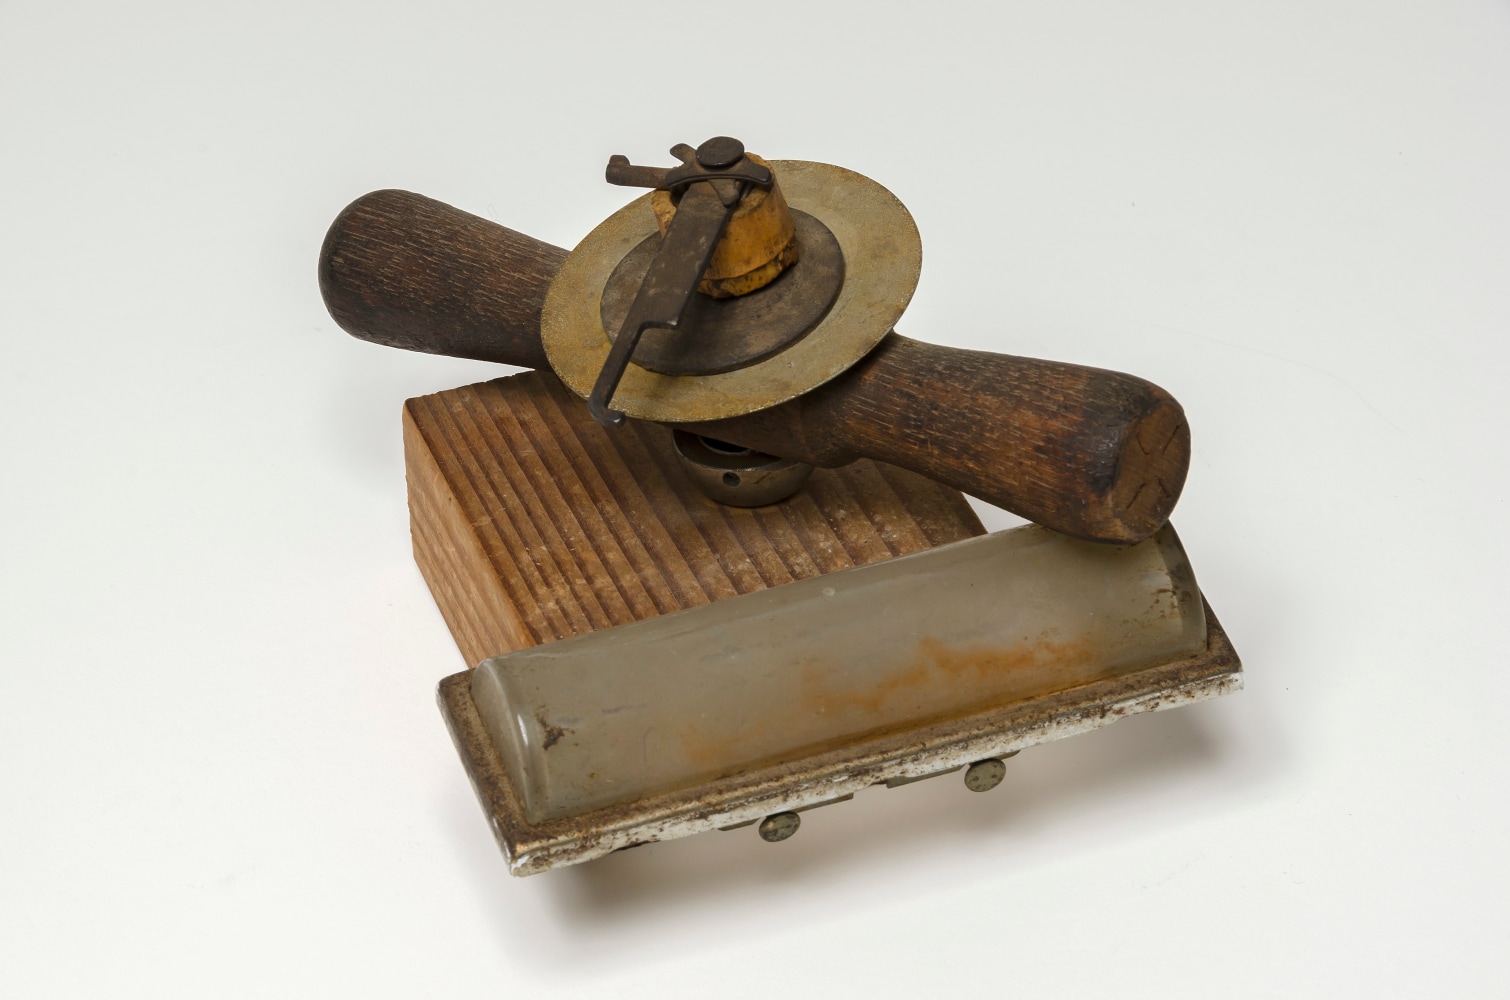 Untitled Composition (Propeller), c. 1960

mixed media sculpture

6 3/4 x 5 1/2 x 4 1/2 inches; 17.1 x 14 x 11.4 centimeters

LSFA# 14245